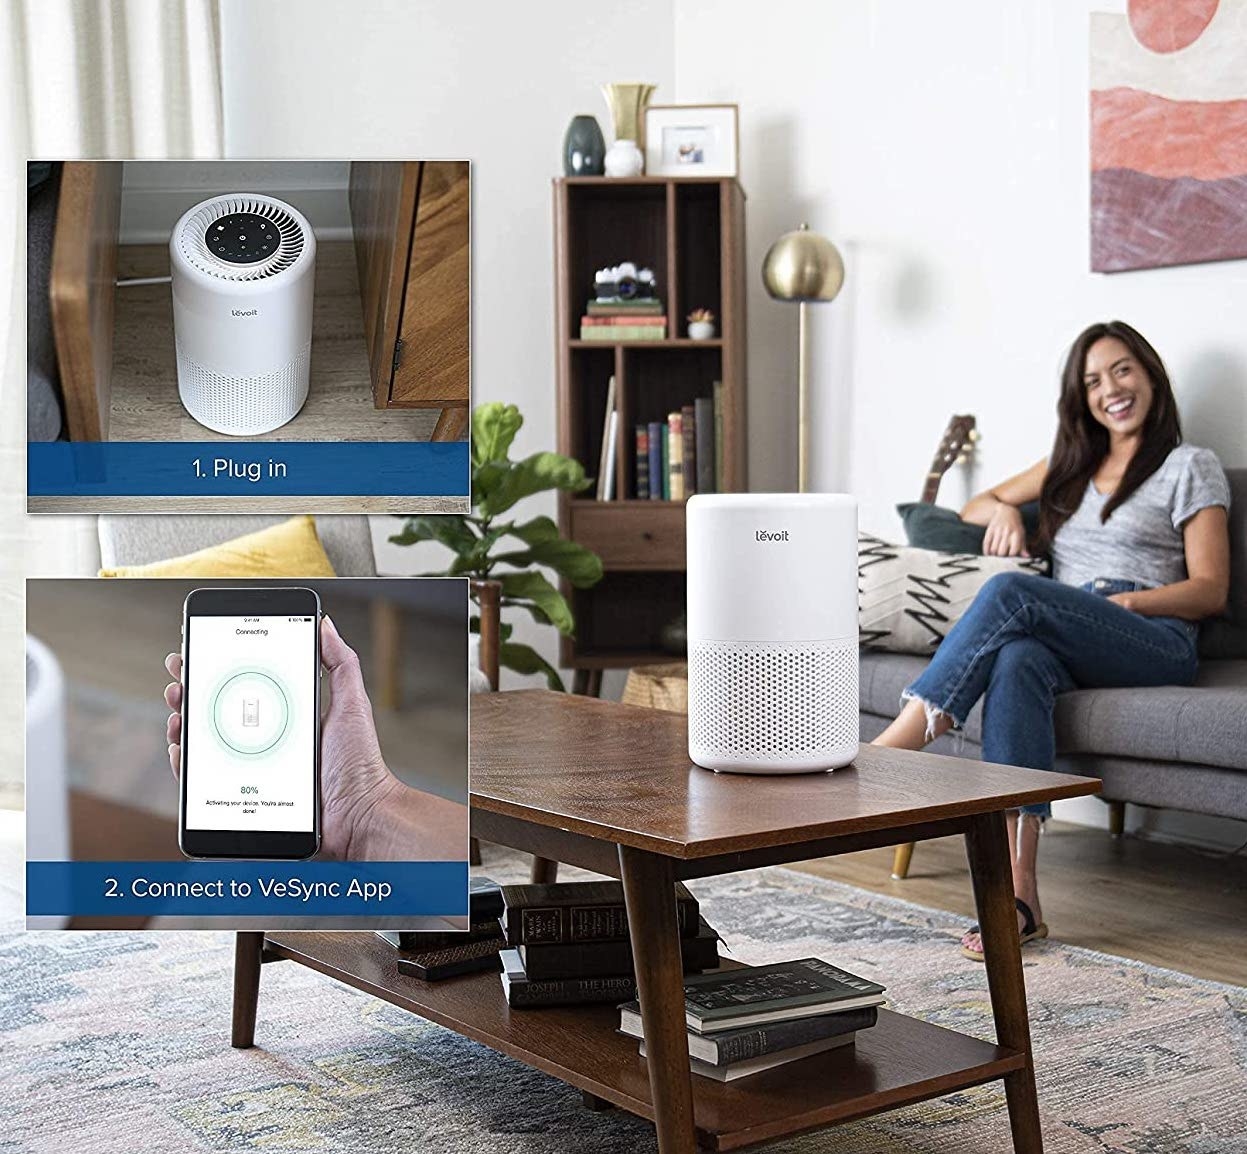 The air purifier on a table in front of a person sitting on a couch